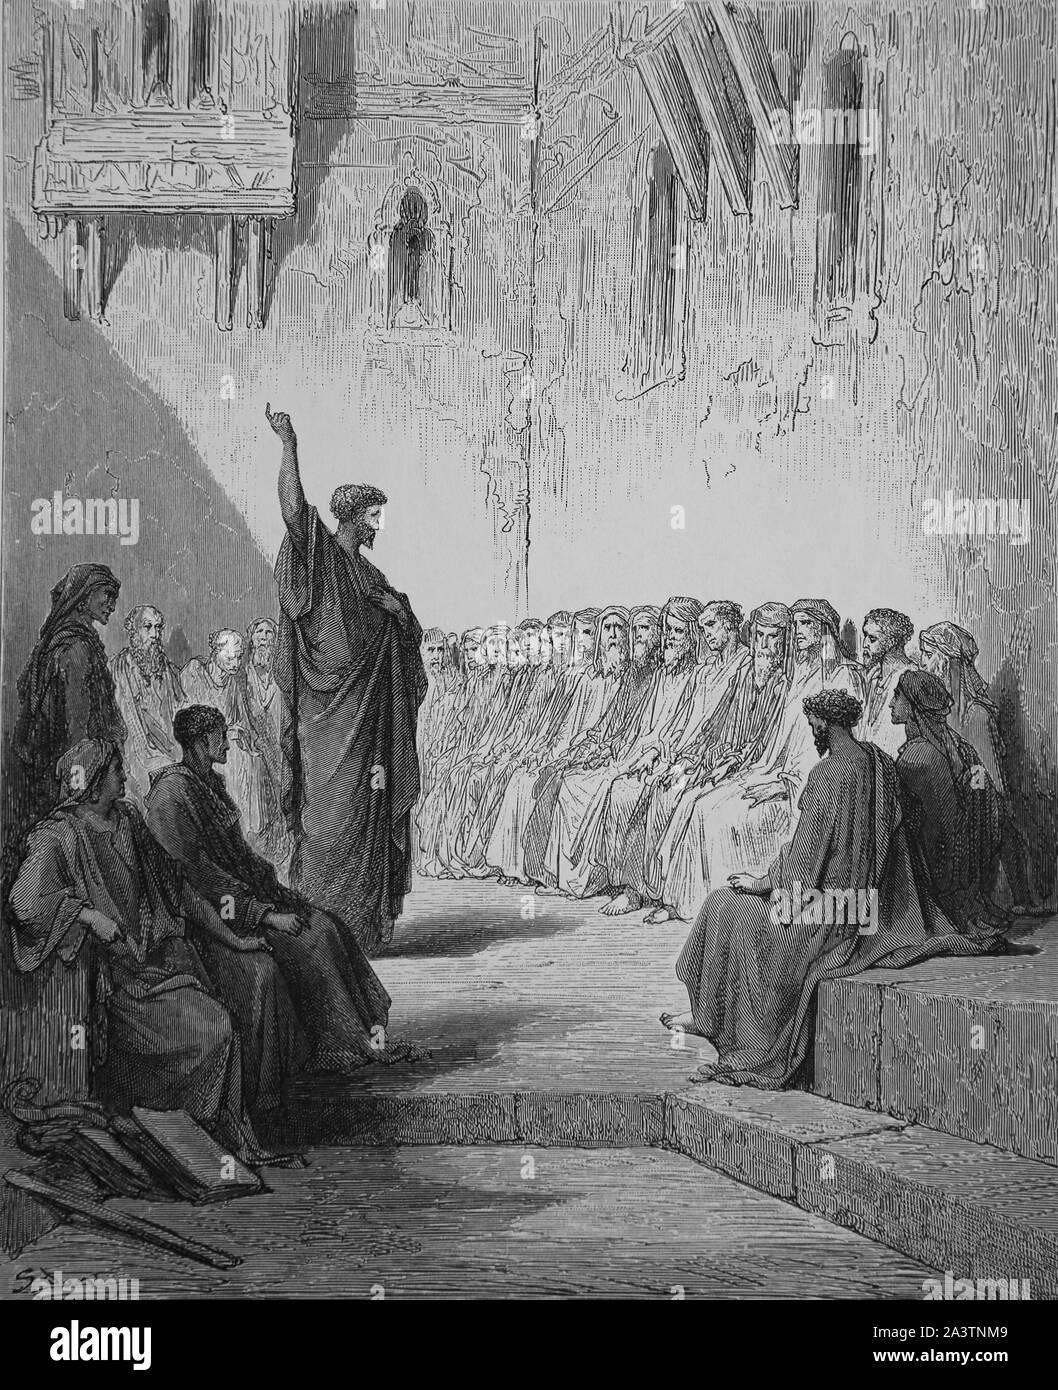 Book of Acts. St. Paul preaching to the Thessalonians. (I Thessalonians 2:9), Engraving. Bible Illustration by Gustave Dore. 19th century. Stock Photo